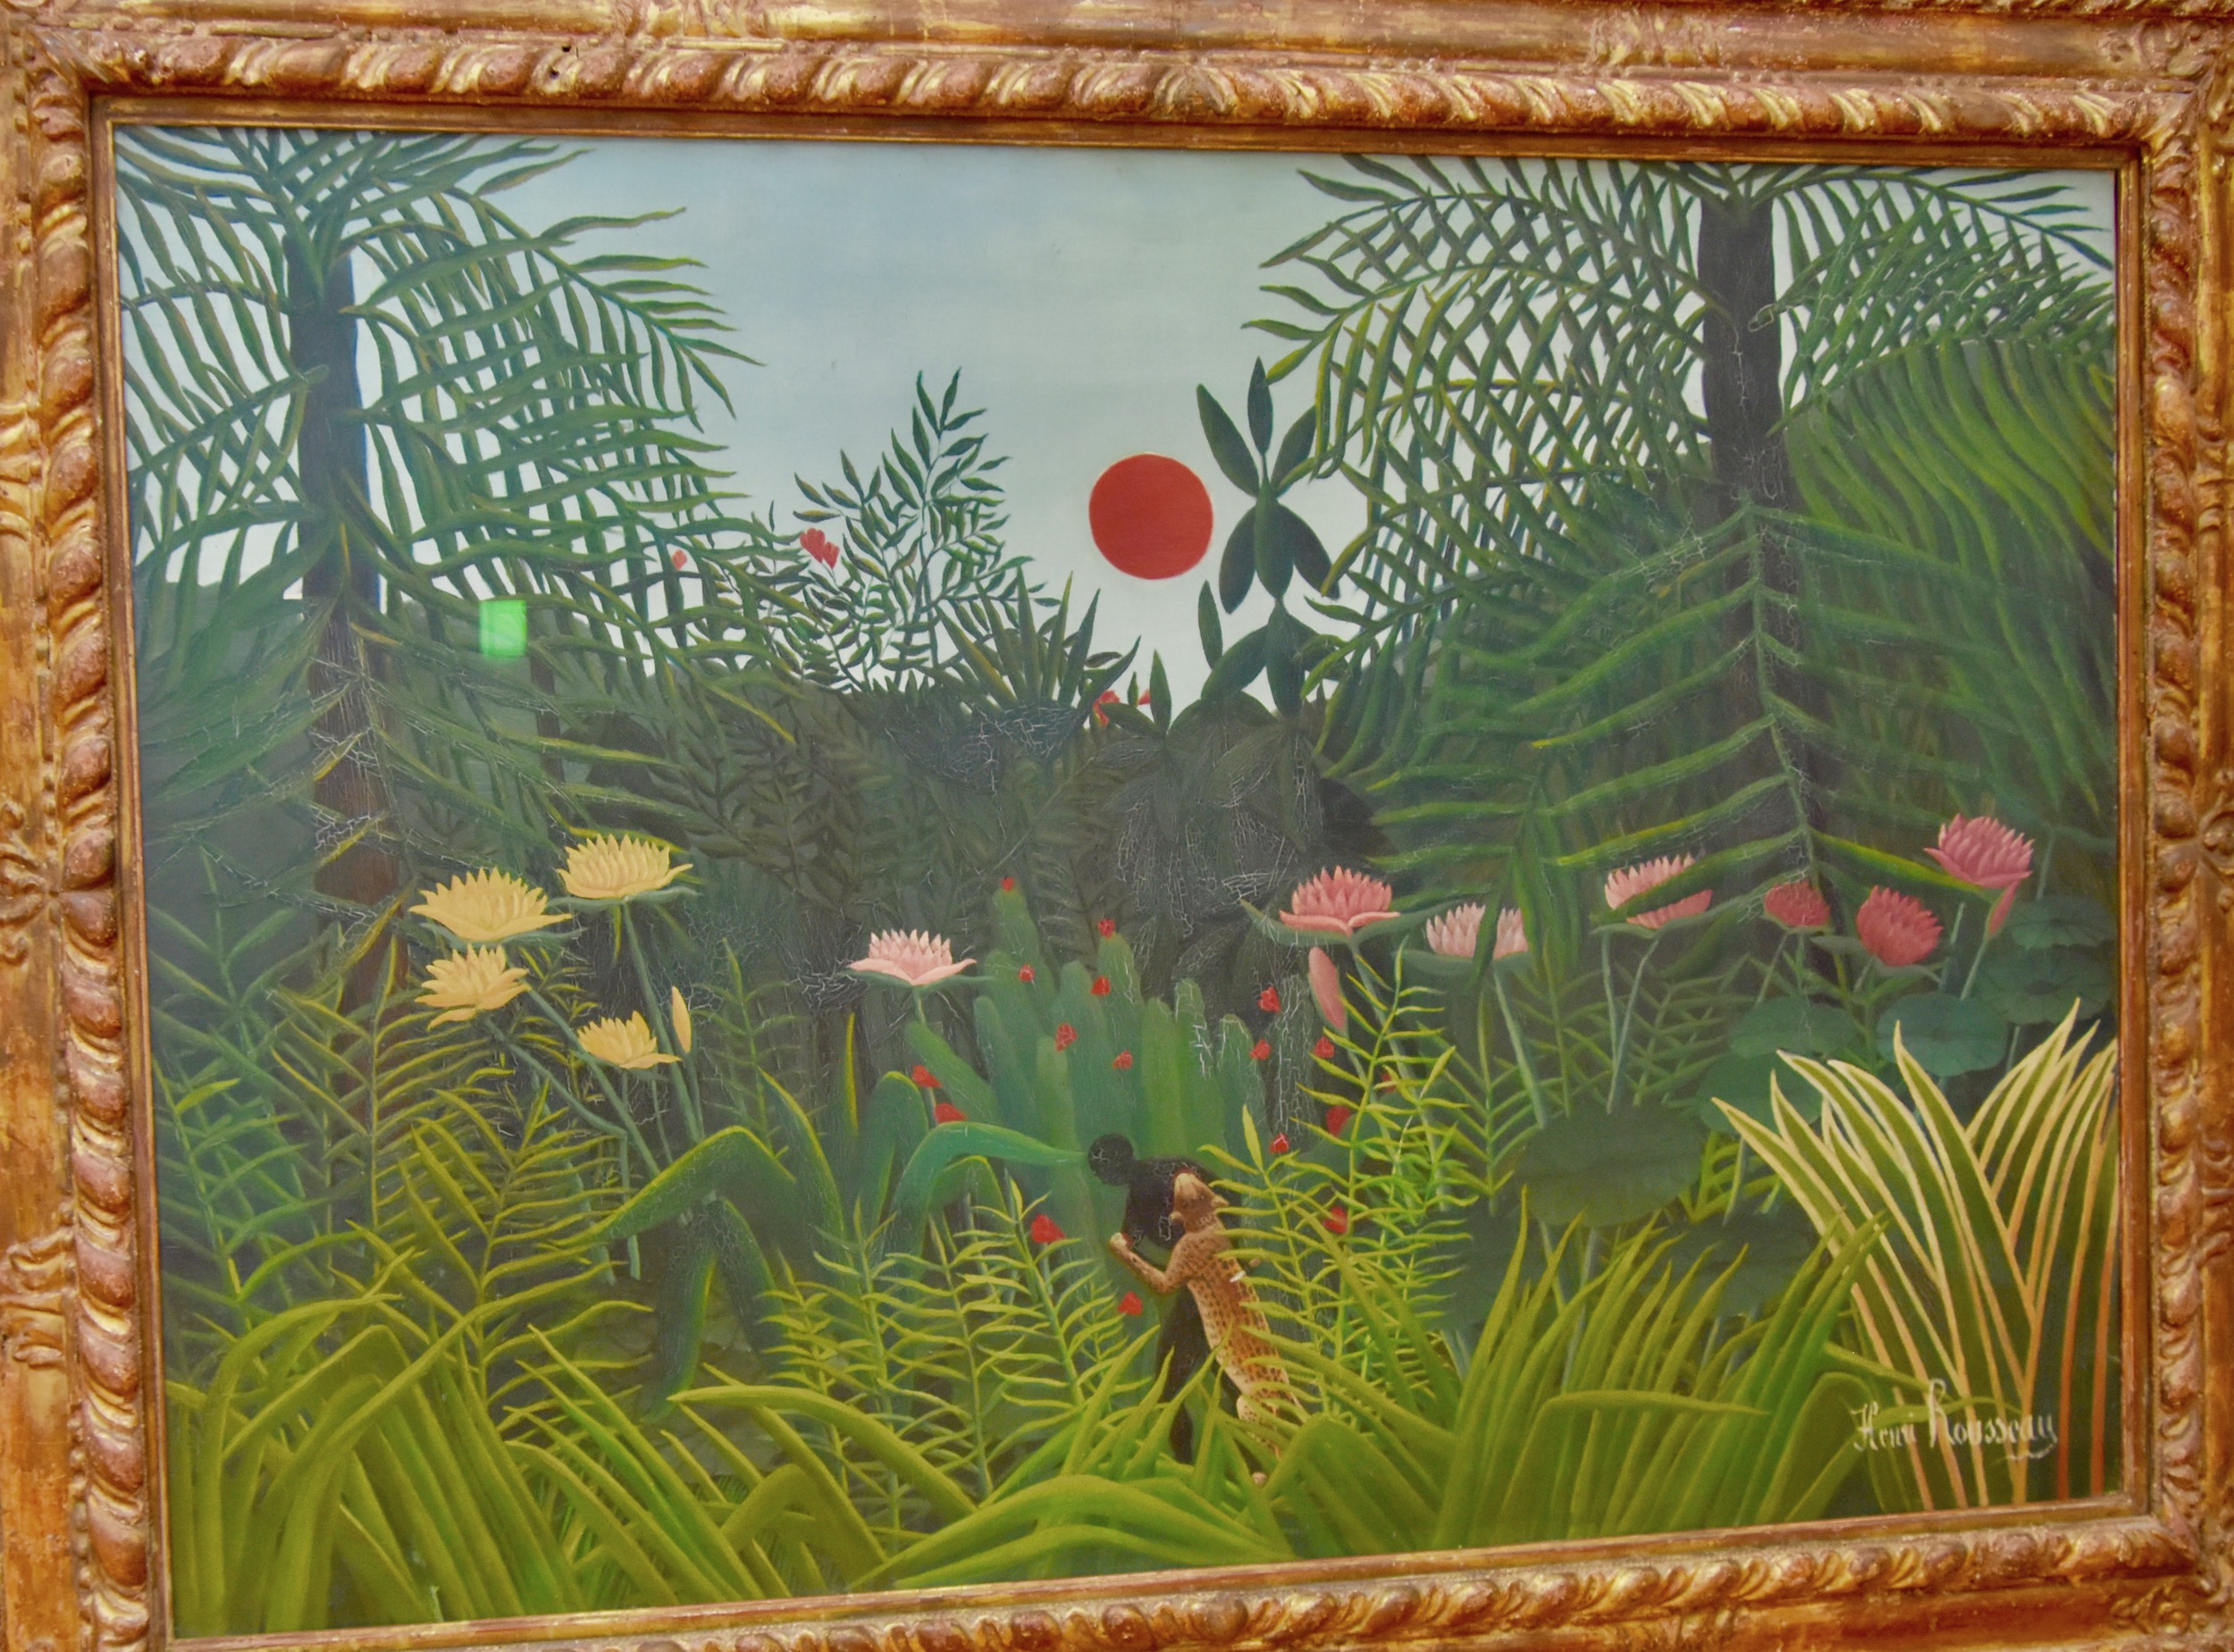 Rousseau - Sunset in the Jungle, Kunstmuseum Basel